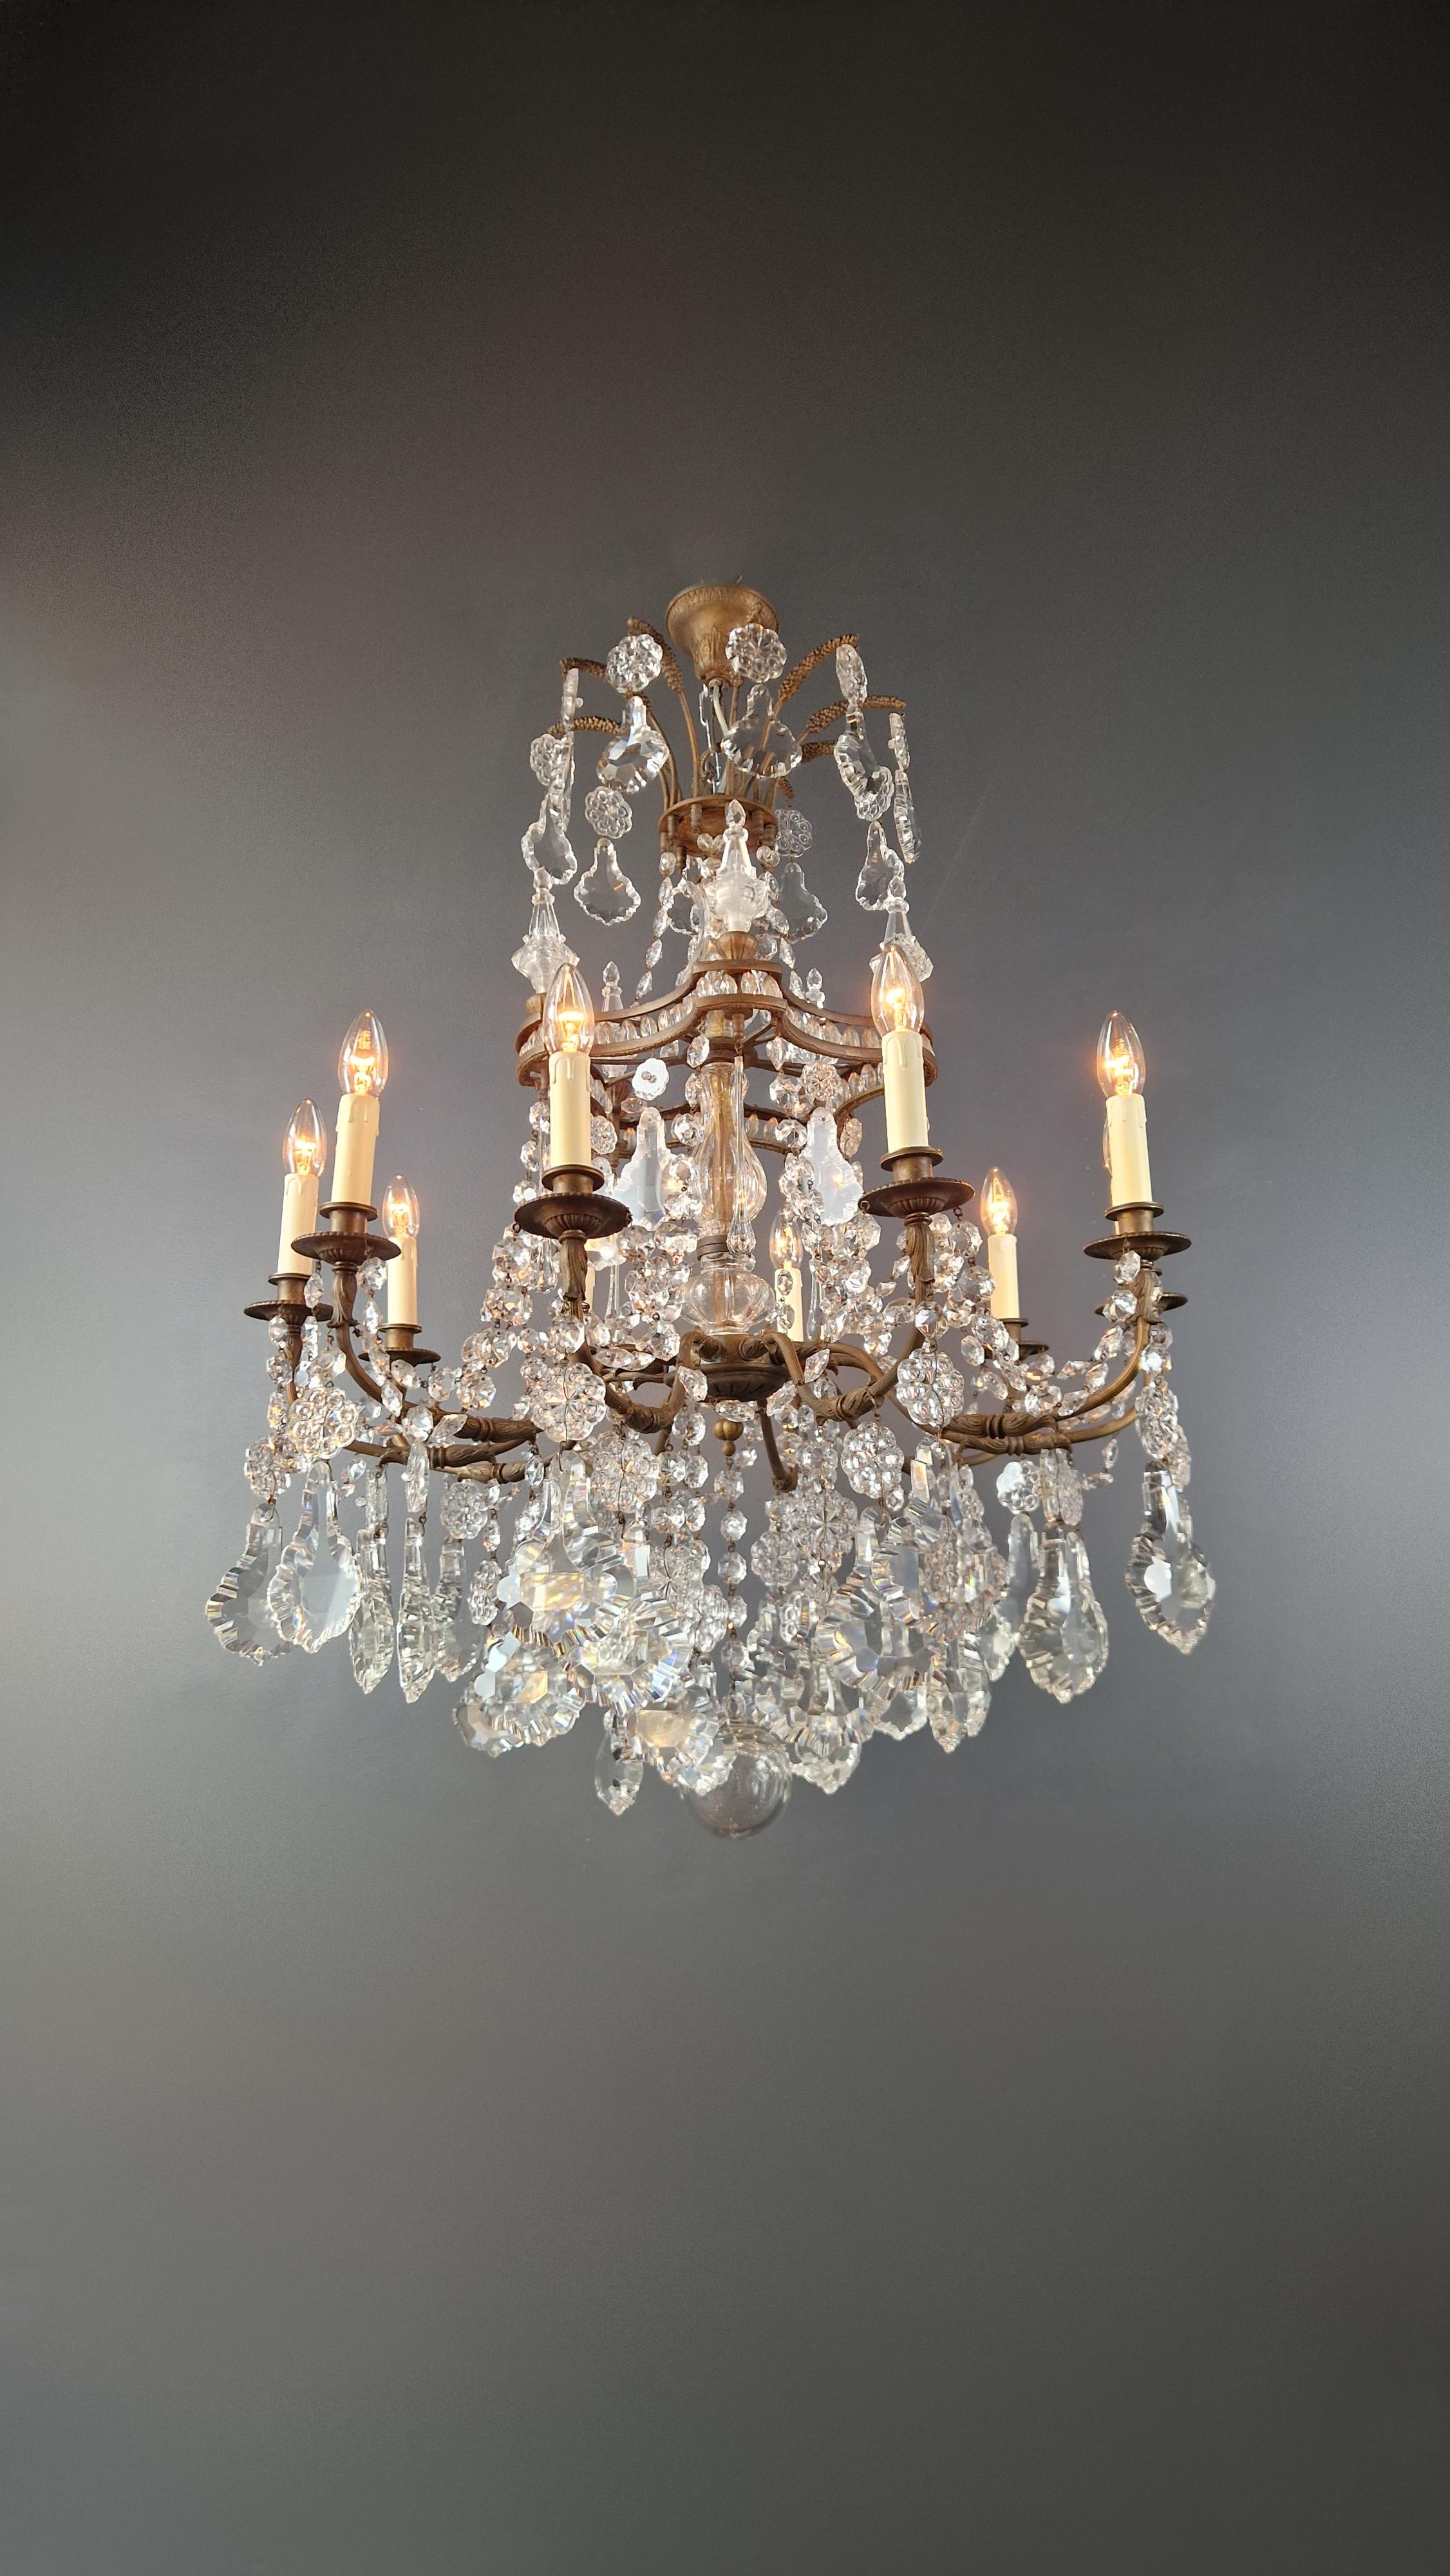 Art Nouveau Crystal Chandelier Brass Large Crystals Traditional Antique Ceiling For Sale 2